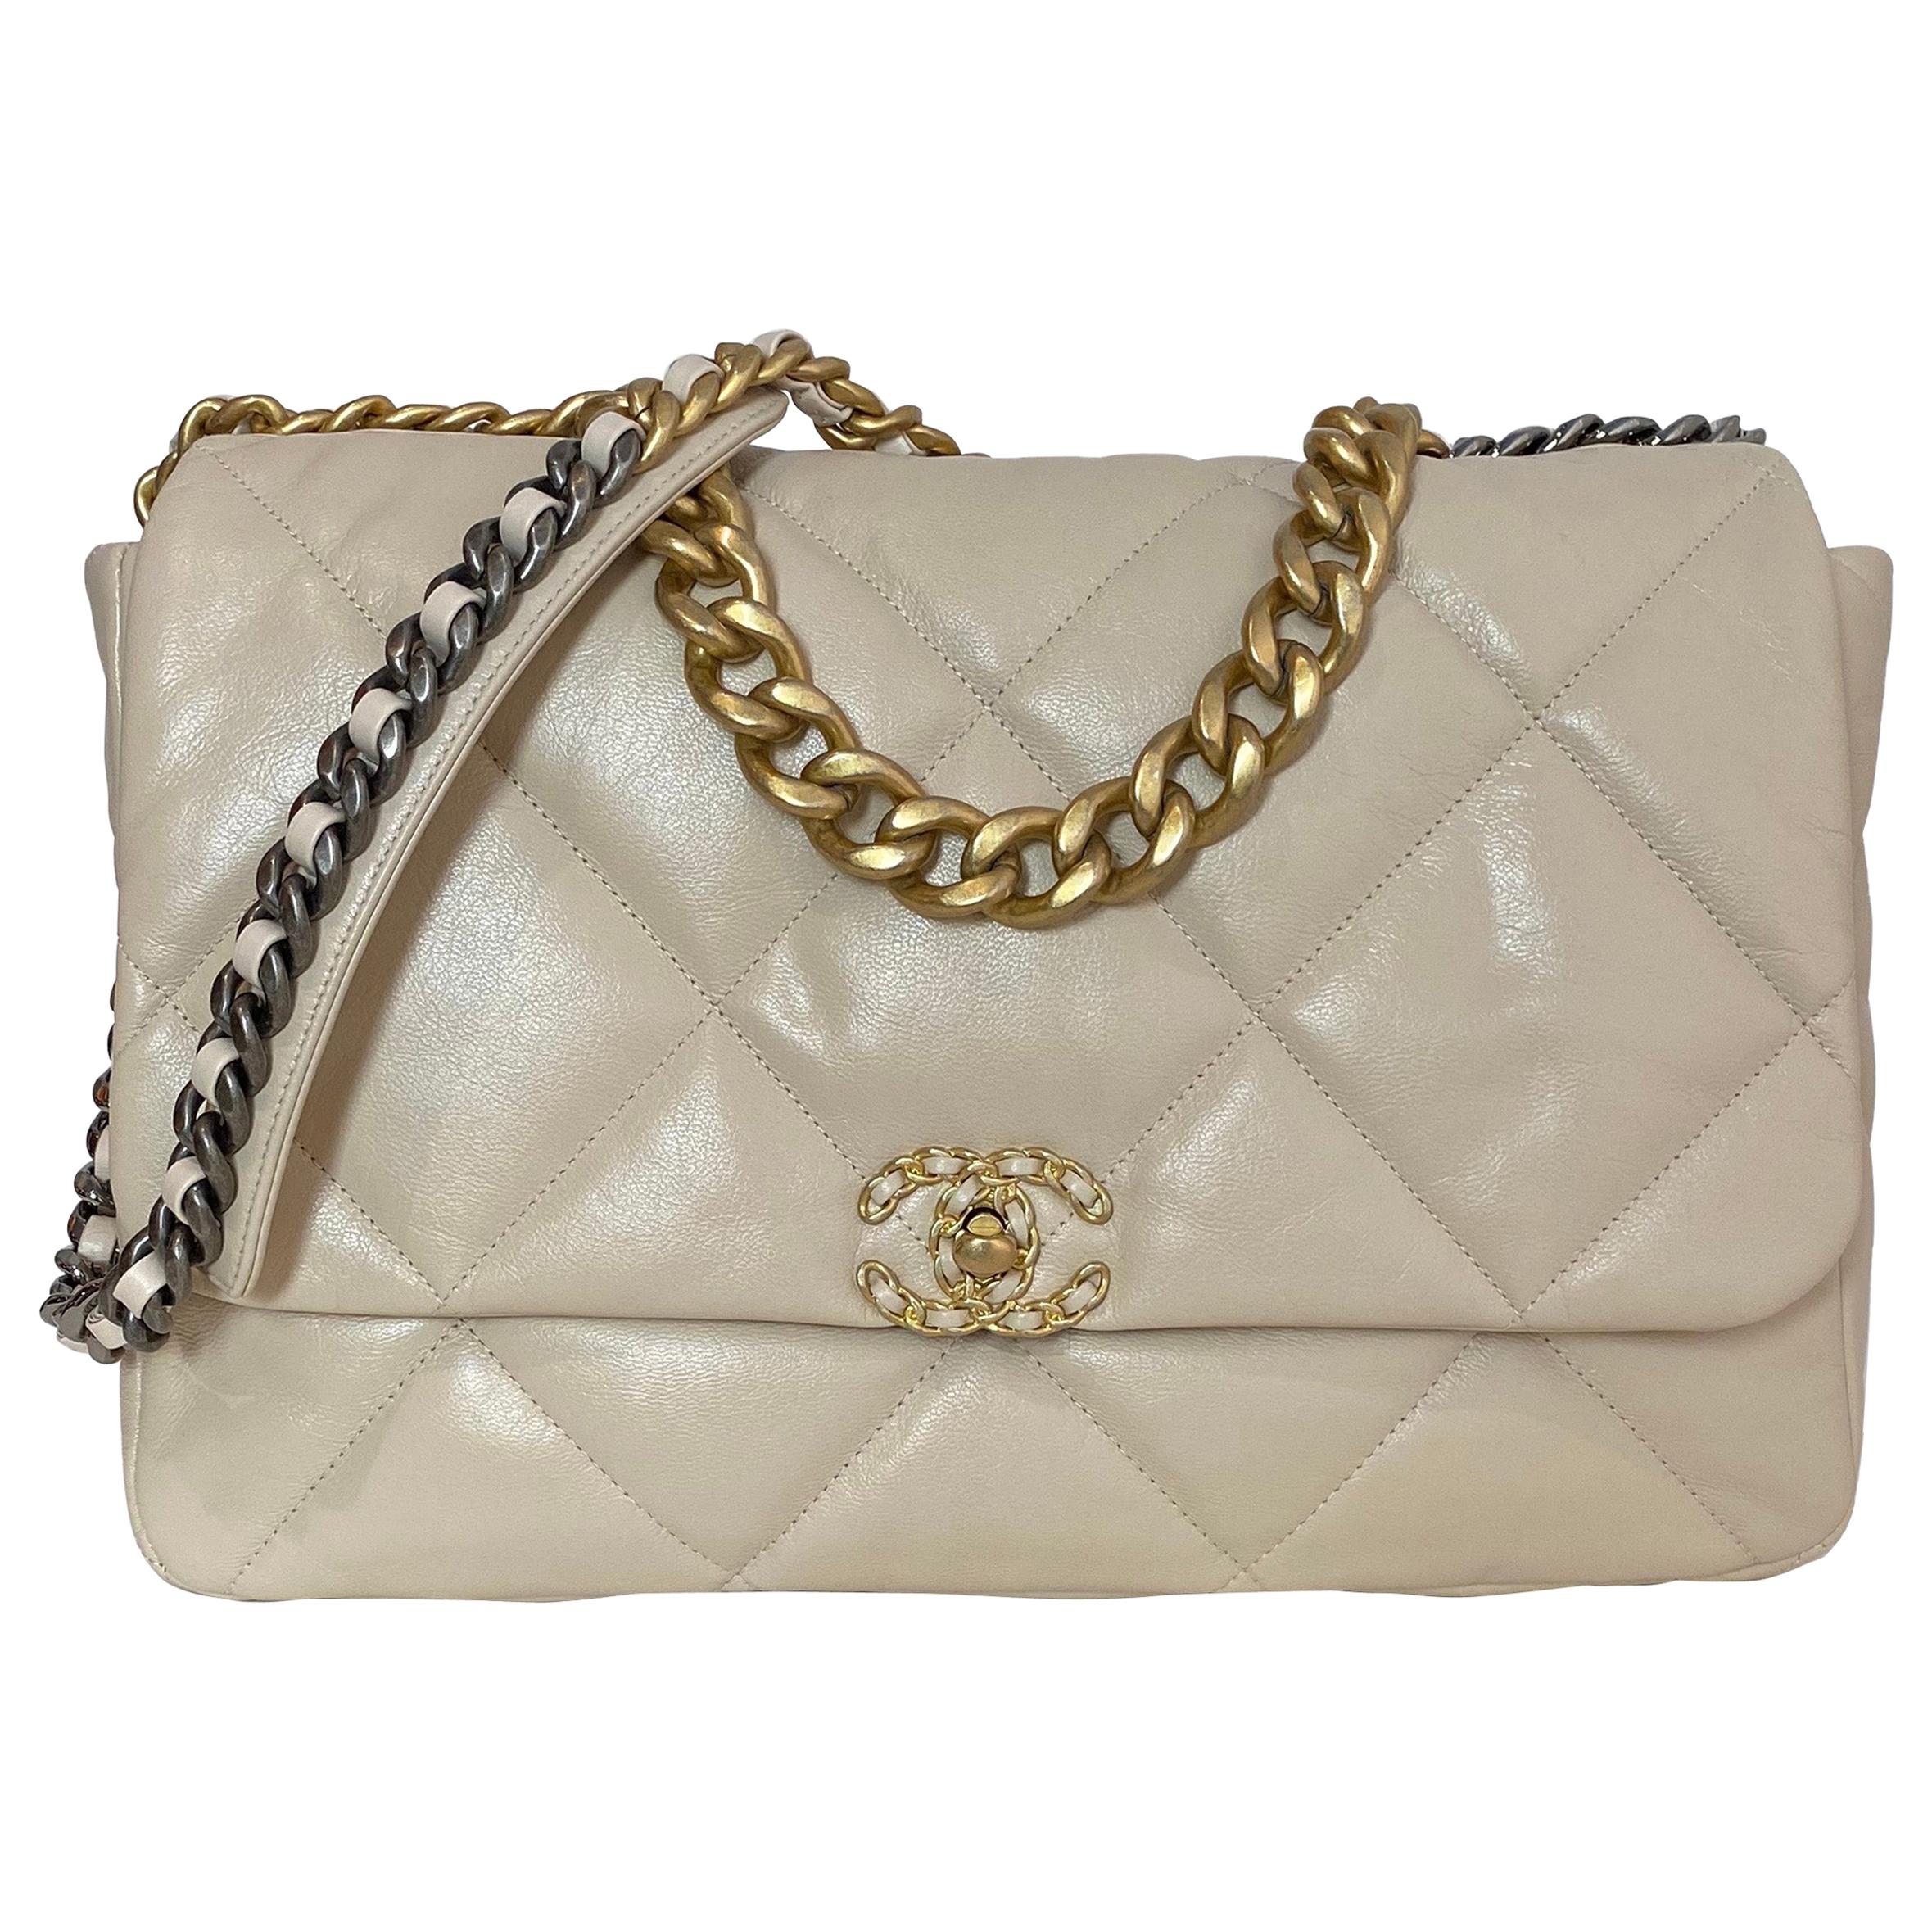 Chanel Quilted Large 19 Flap Beige Lambskin Leather Cross Body Bag